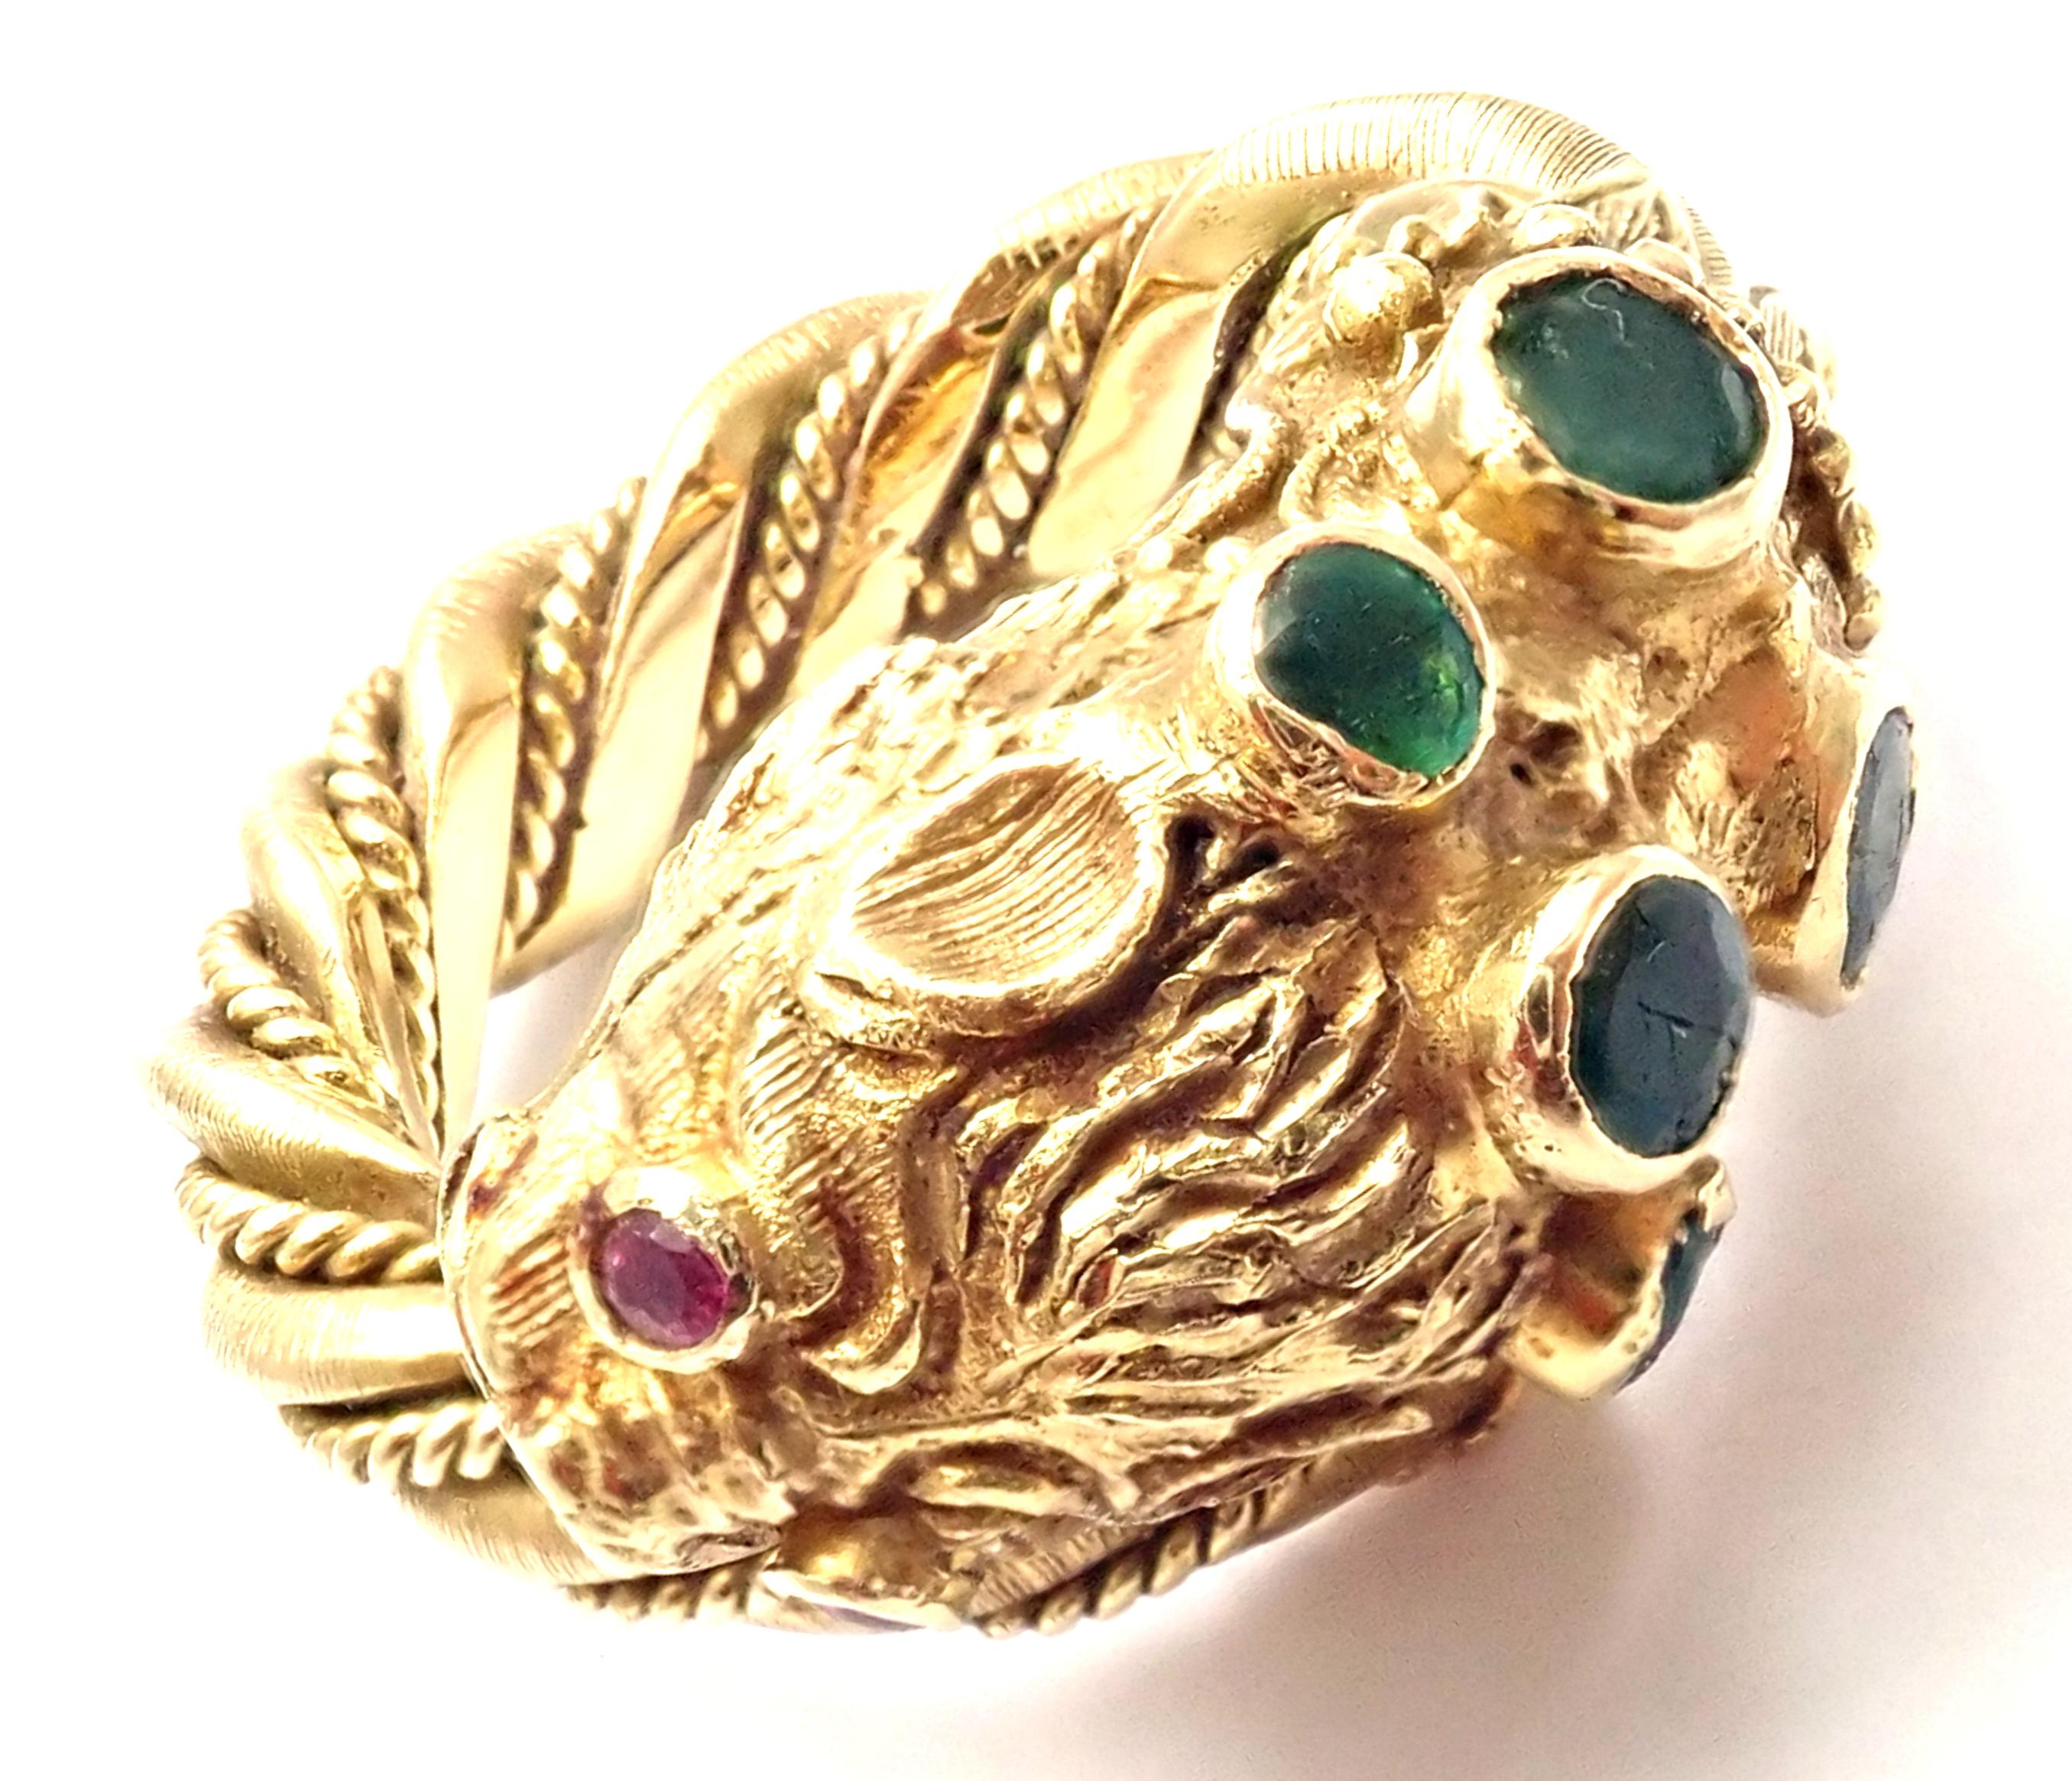 Vintage 18k Yellow Gold Emerald & Ruby Chimera Ring by Ilias Lalaounis. 
With 5 round emeralds
2 round rubies in the eyes
Details: 
Ring Size: 3.5
Weight: 16 grams
Stamped Hallmarks: Lalaounis A21 750
*Free Shipping within the United States*
YOUR